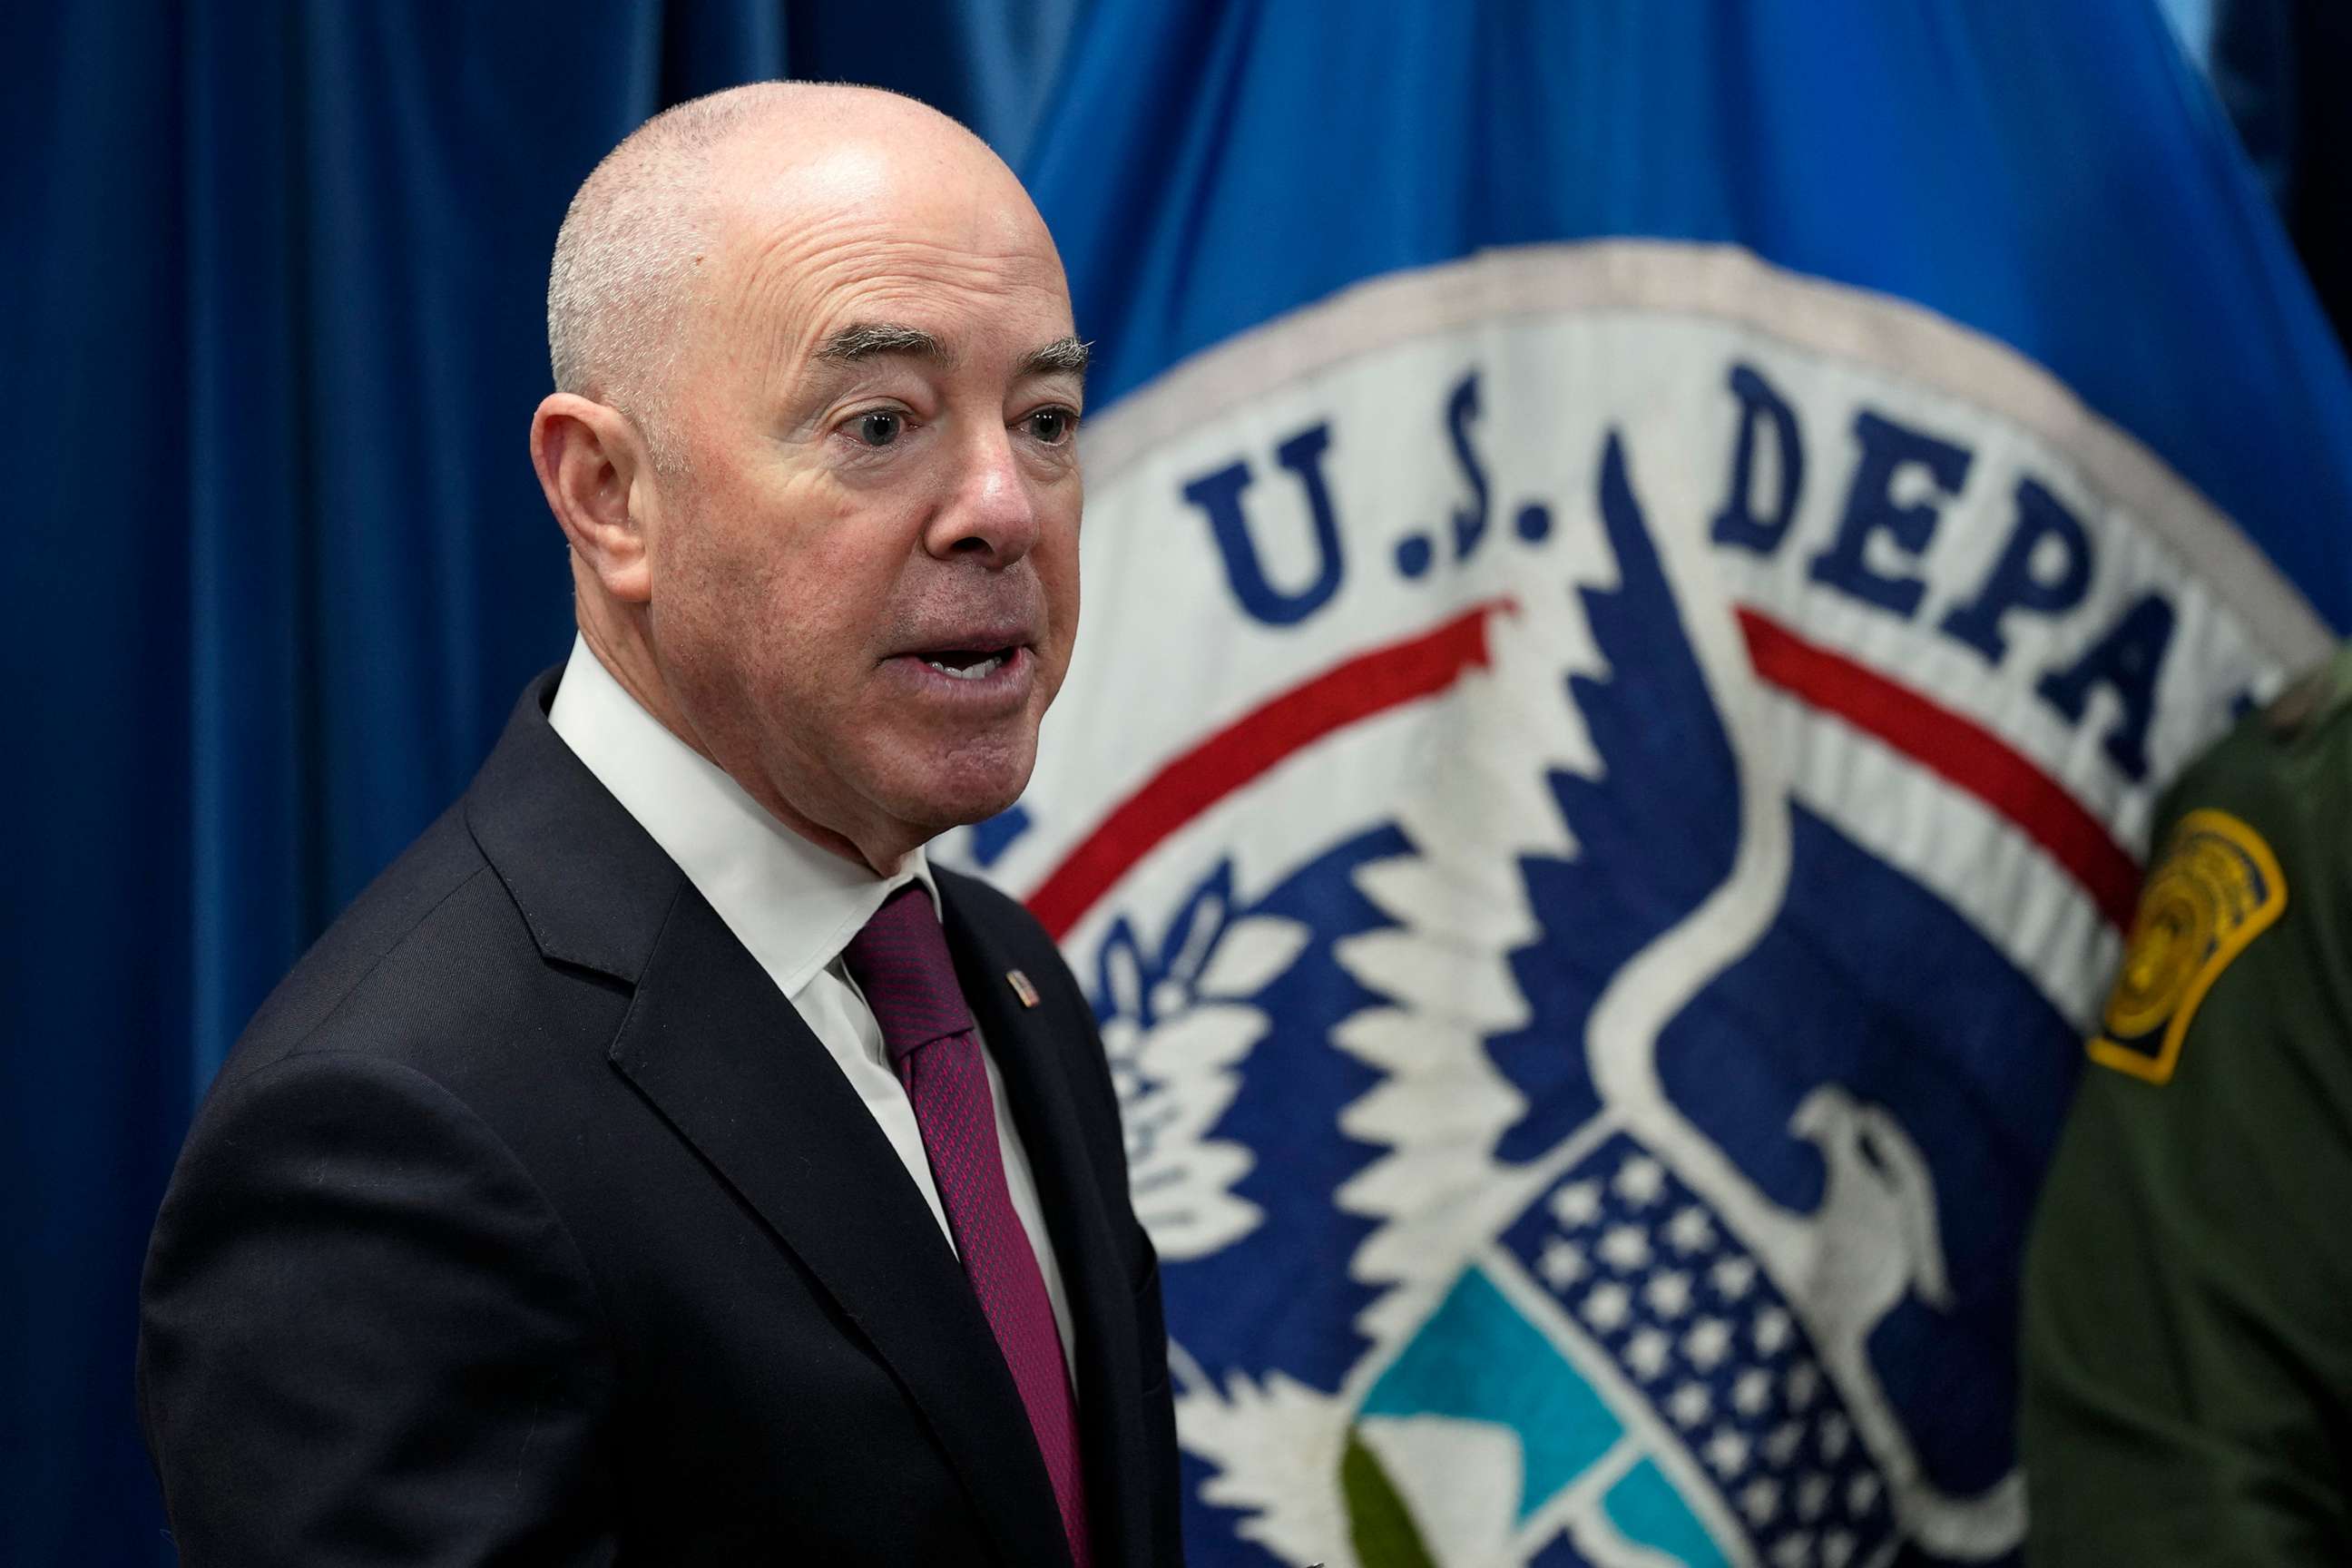 PHOTO: Homeland Security Secretary Alejandro Mayorkas speaks during a news conference in Washington, DC on new border enforcement measures to limit unlawful migration, expand pathways for legal immigration, and increase border security, Jan. 5, 2023.